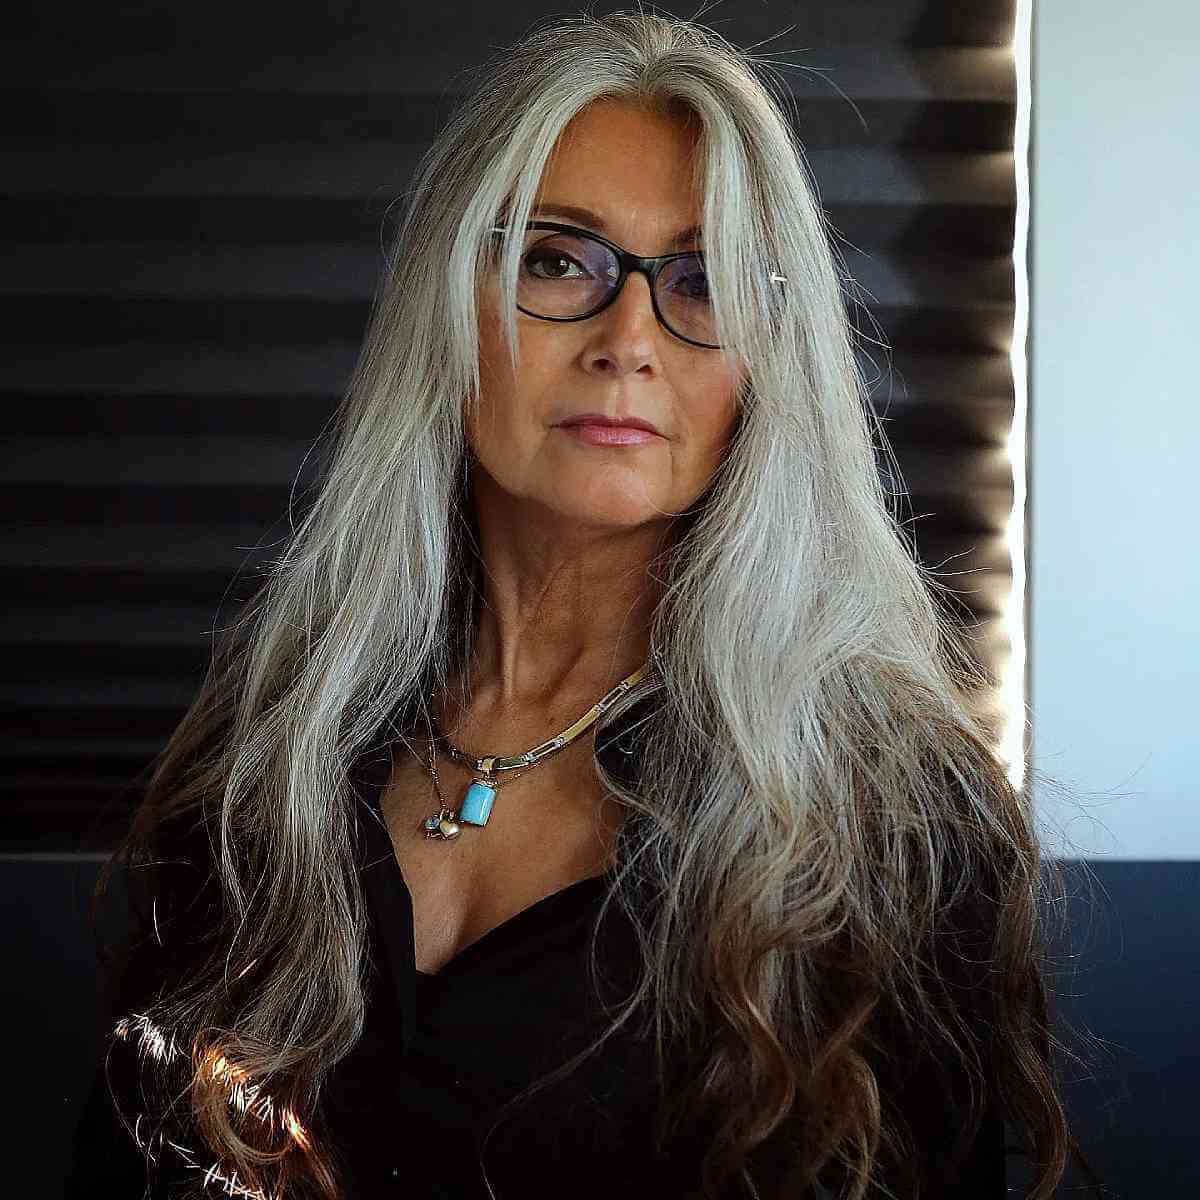 Long Silver Hairstyle for Women Over 50 with Glasses